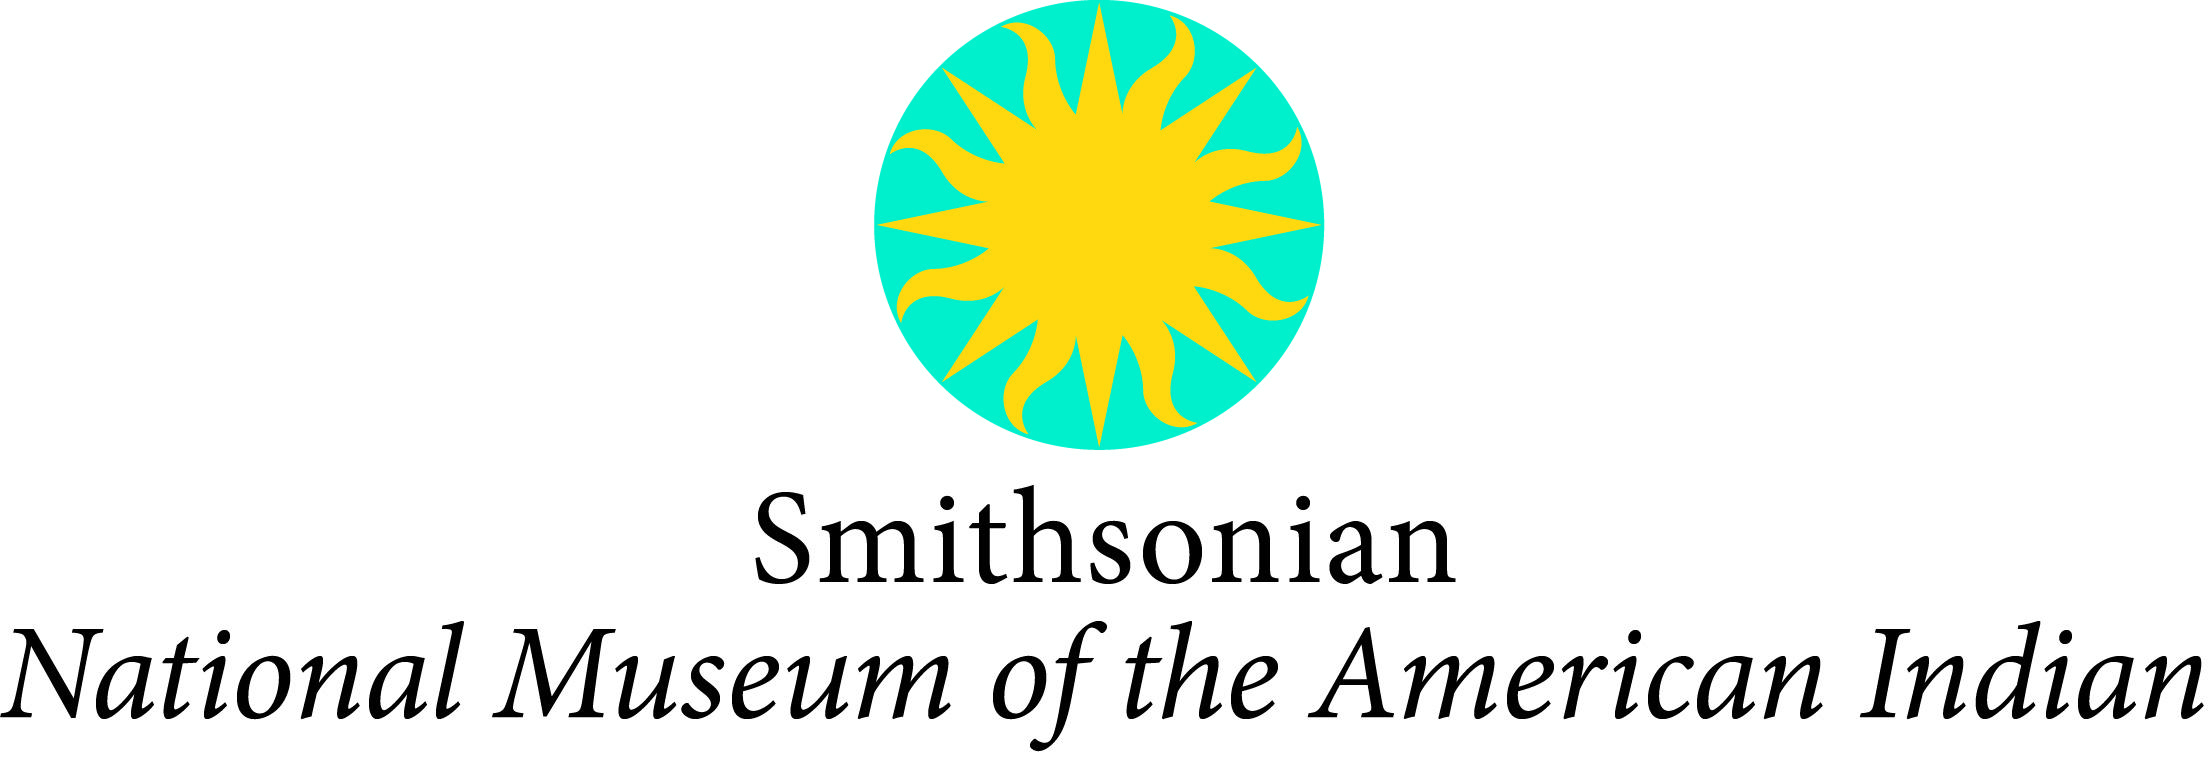 Smithsonian National Museum of the American Indian Logo